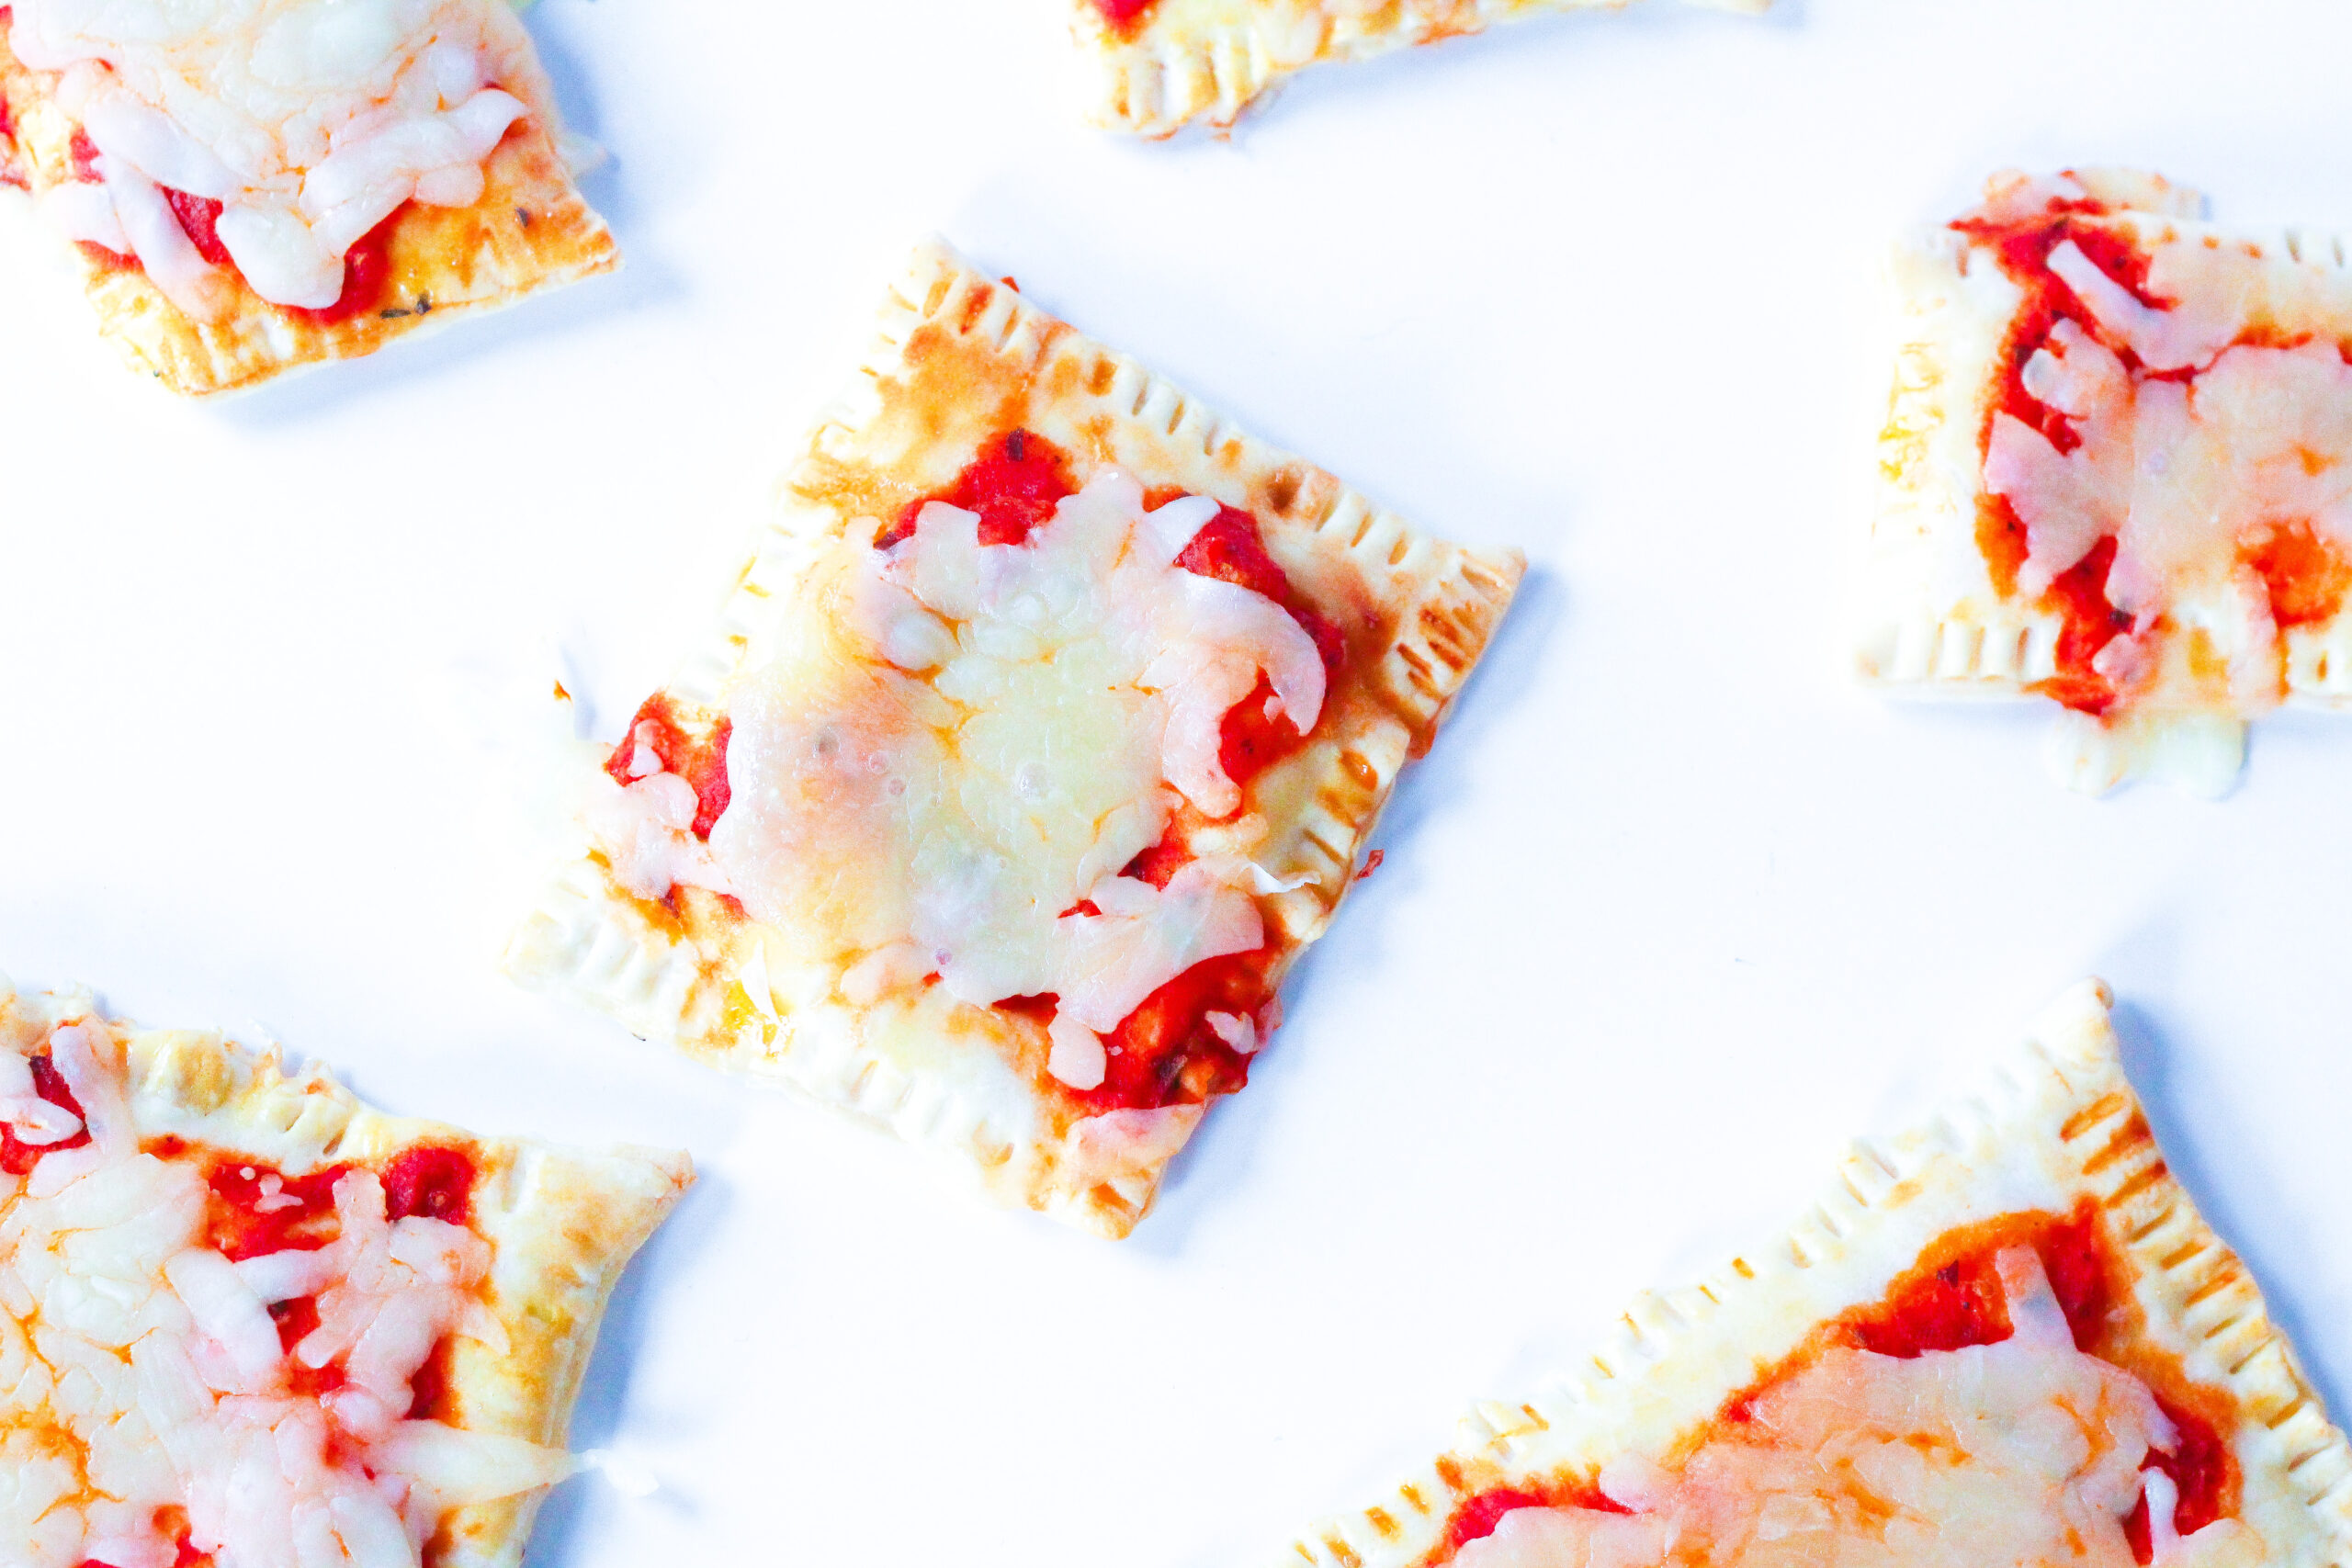 Top down view of pizza poptarts on a white surface. A square poptart is in the center, and all the poptarts surrounding it are partially out of the frame on all sides.